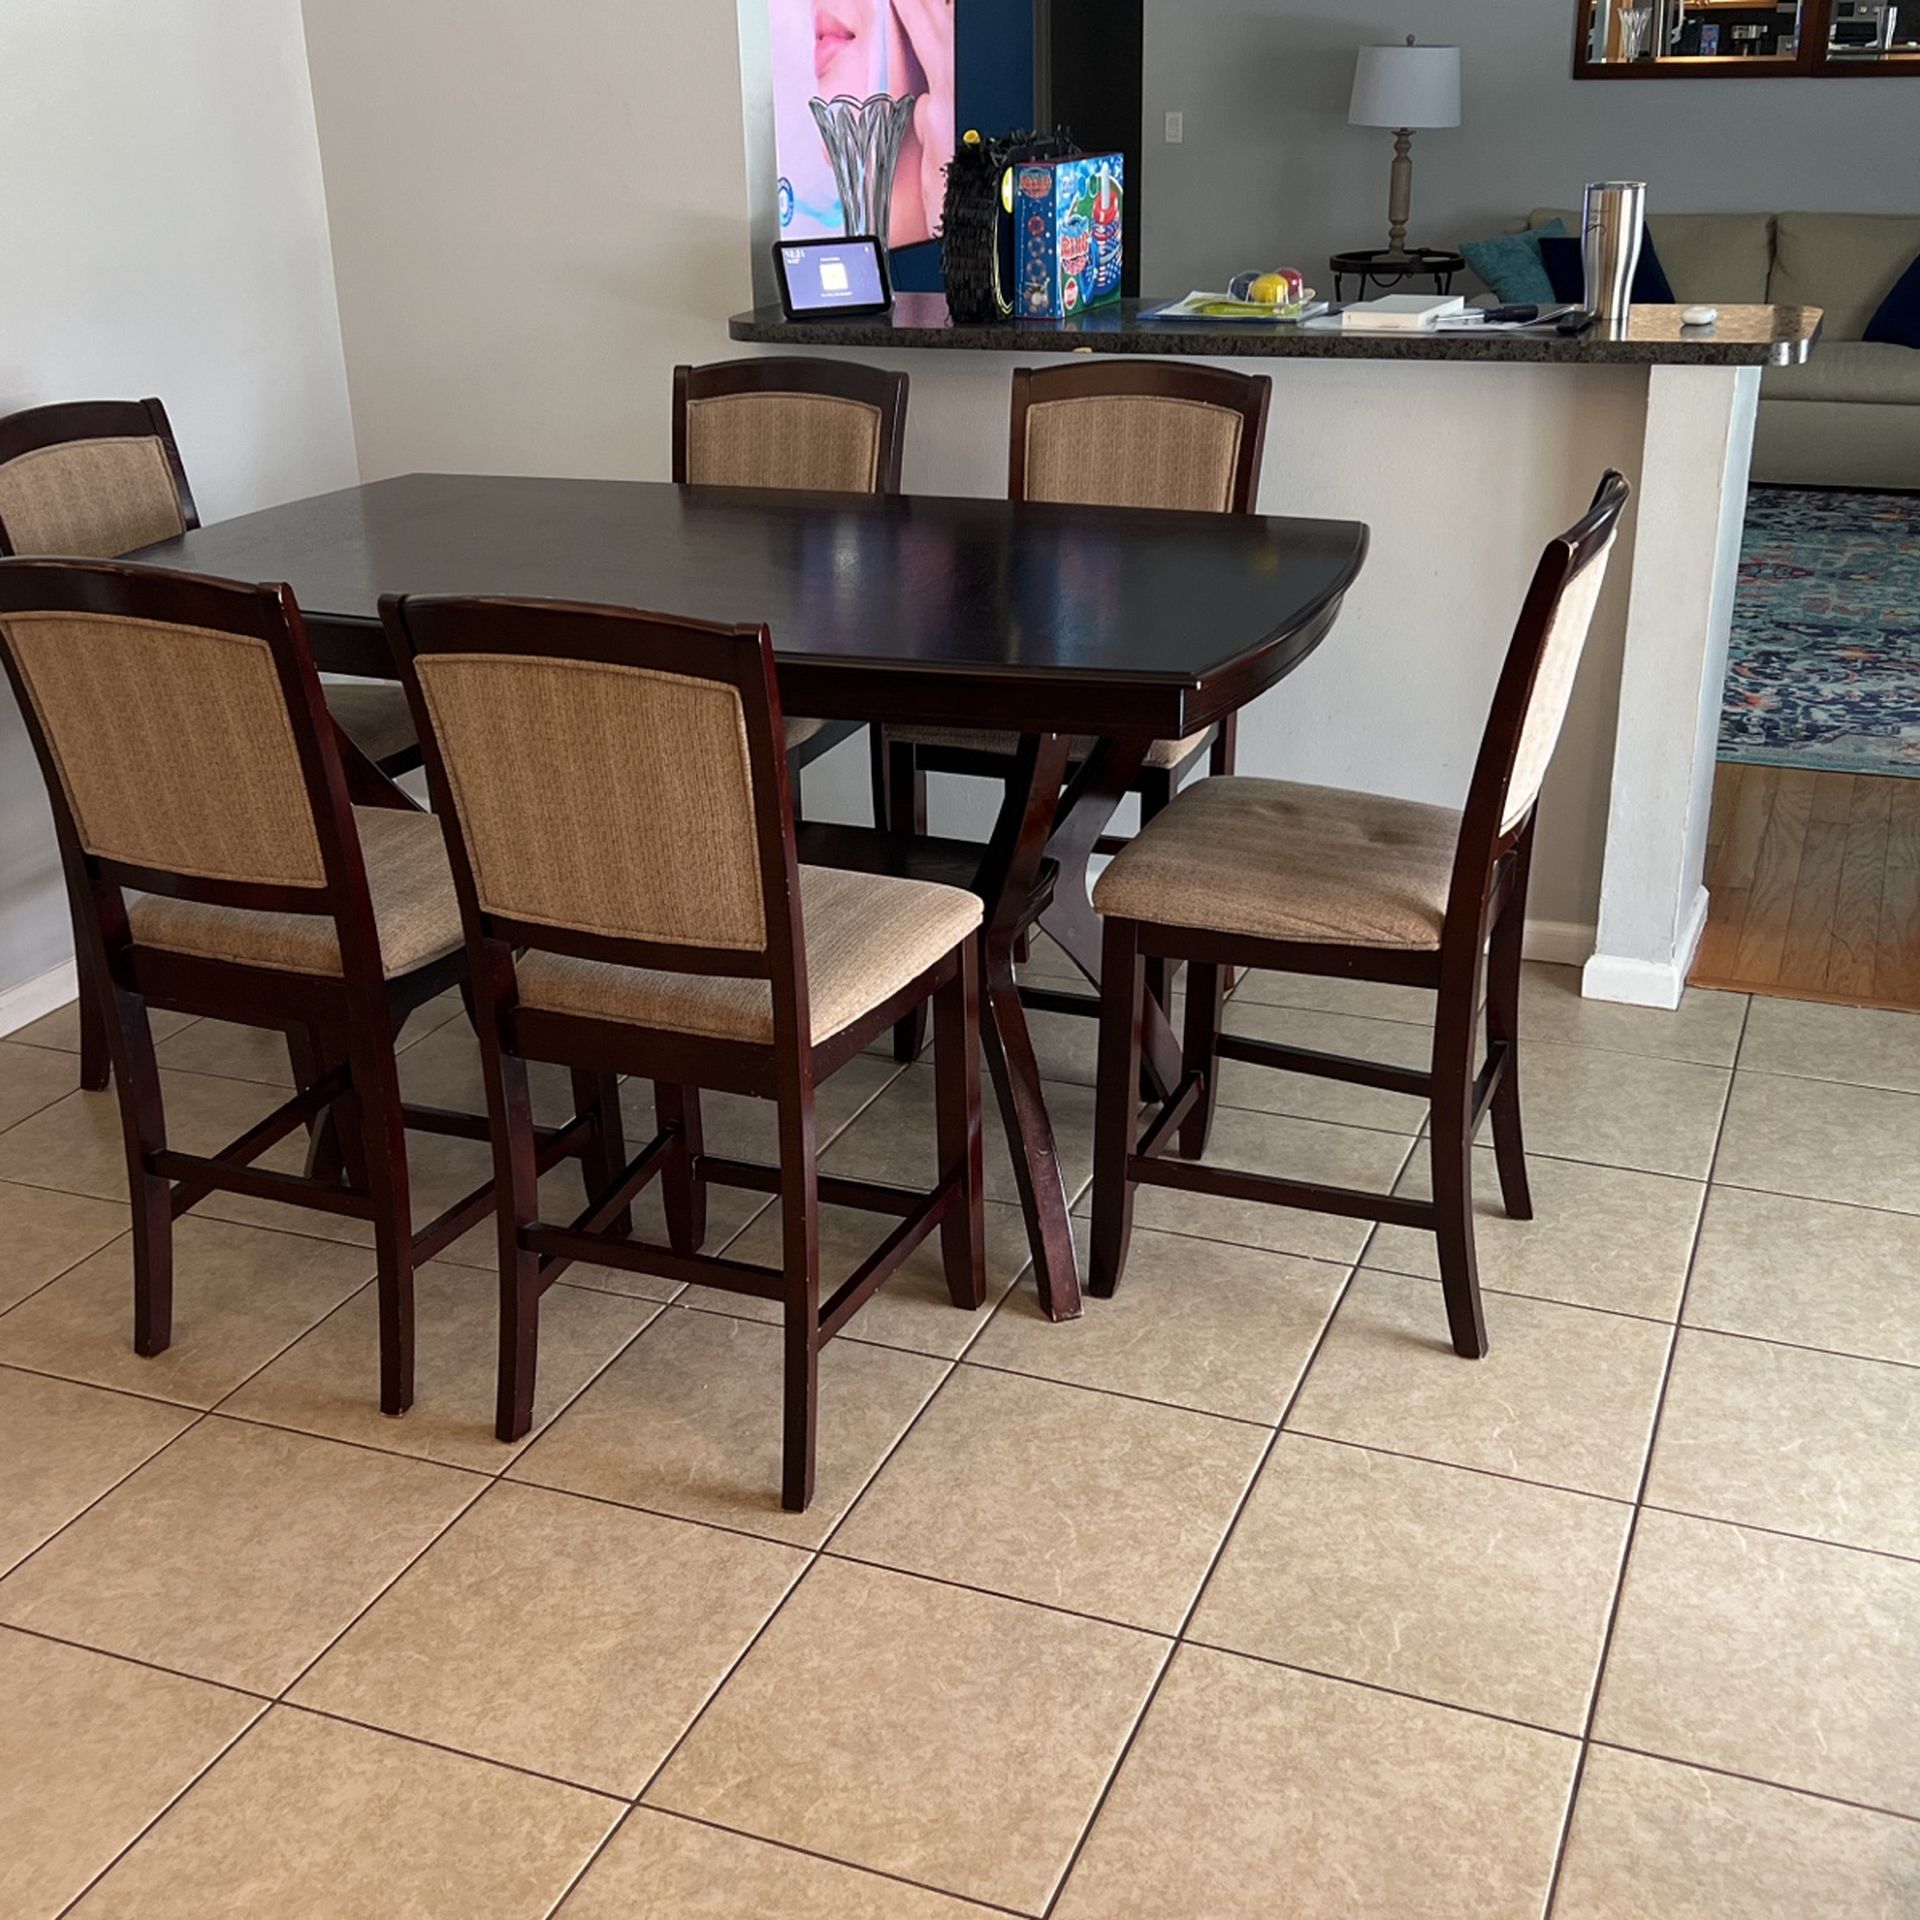 Kitchen/Dining room table and chairs